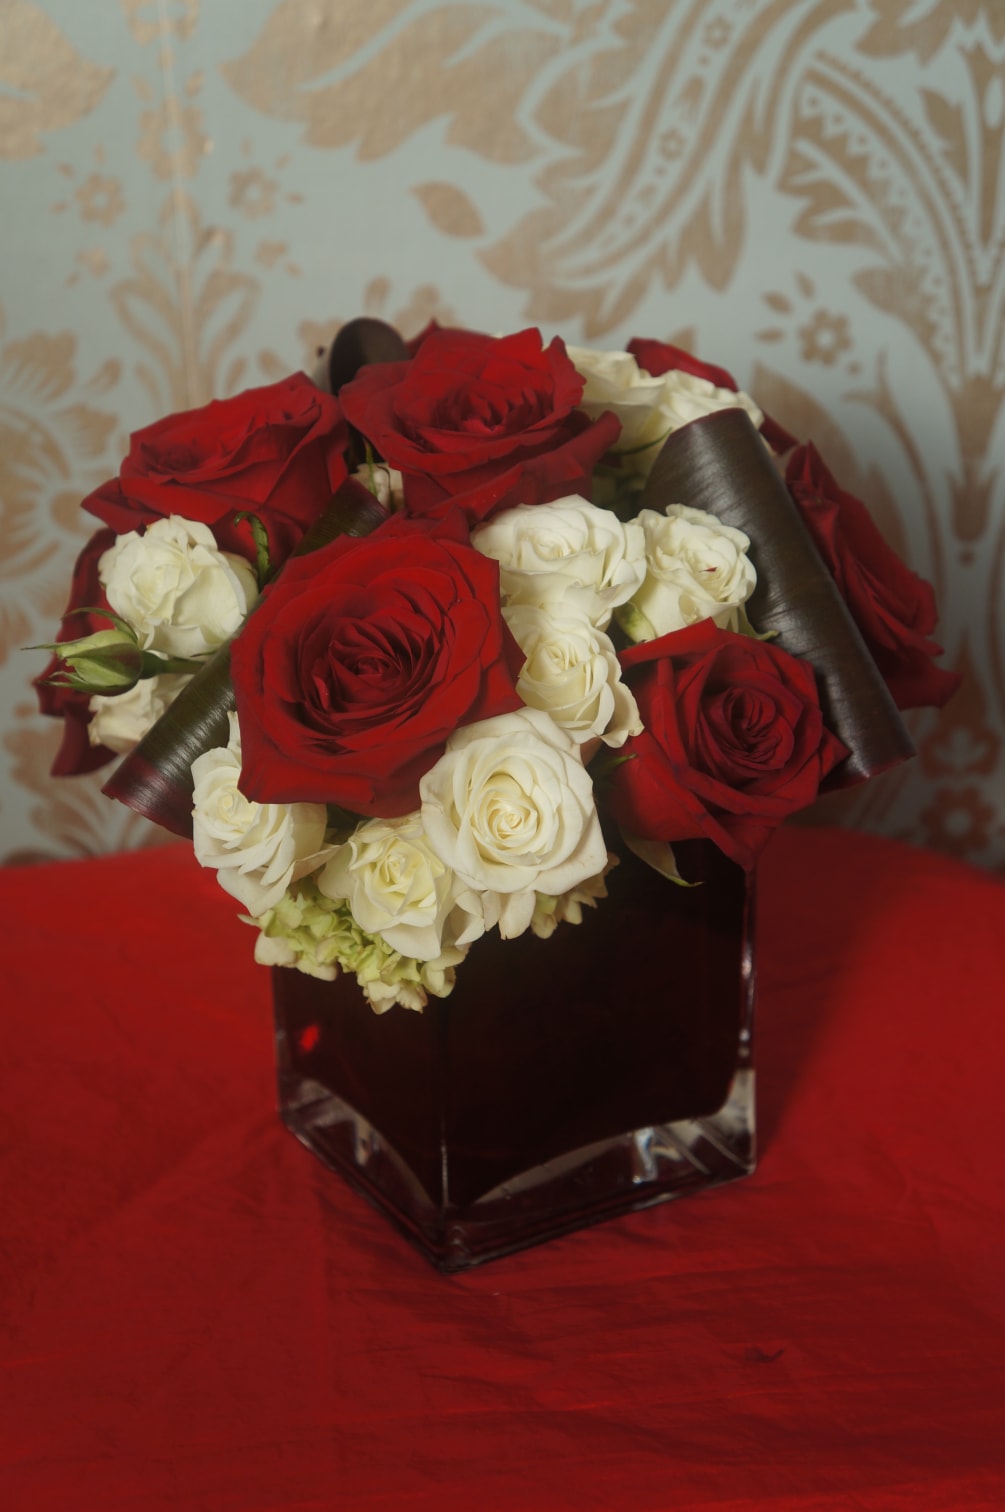 A red square vase filled with green hydrangea and topped off with